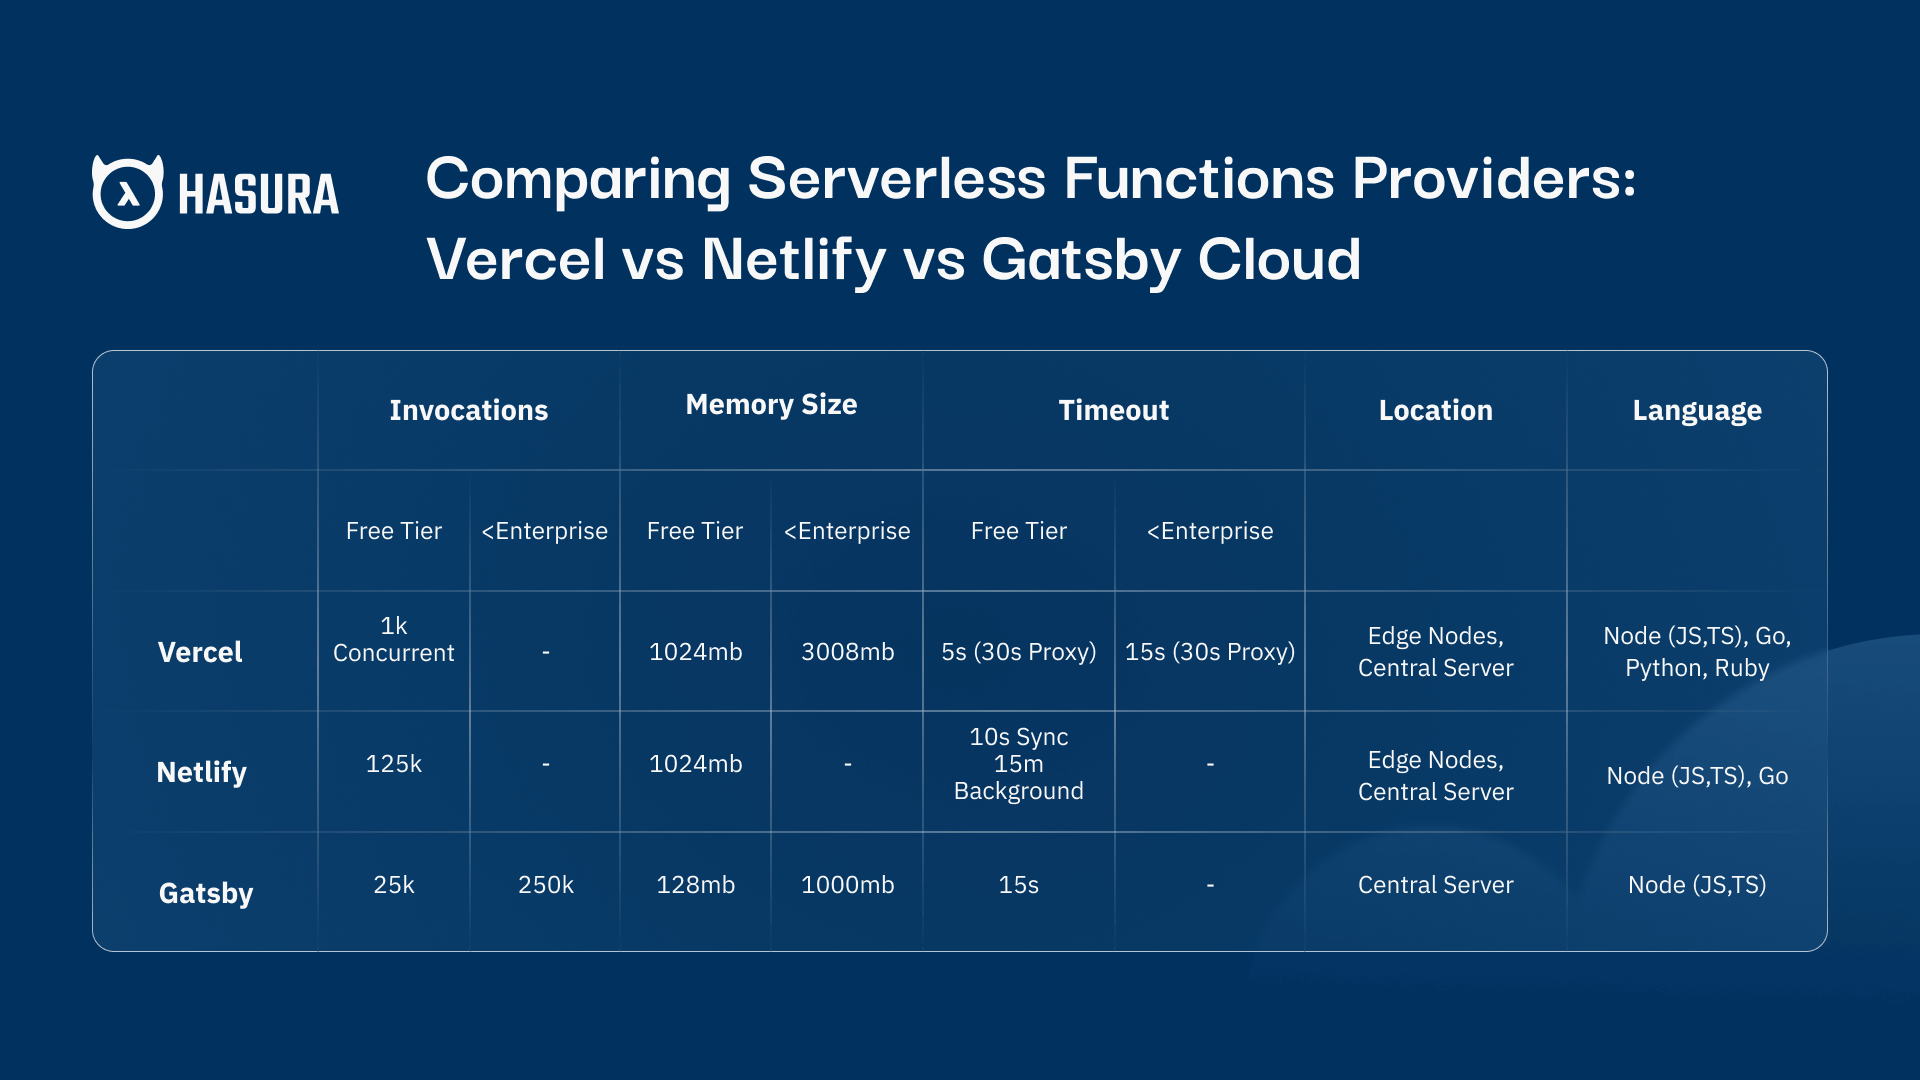 Comparing Serverless Functions Providers